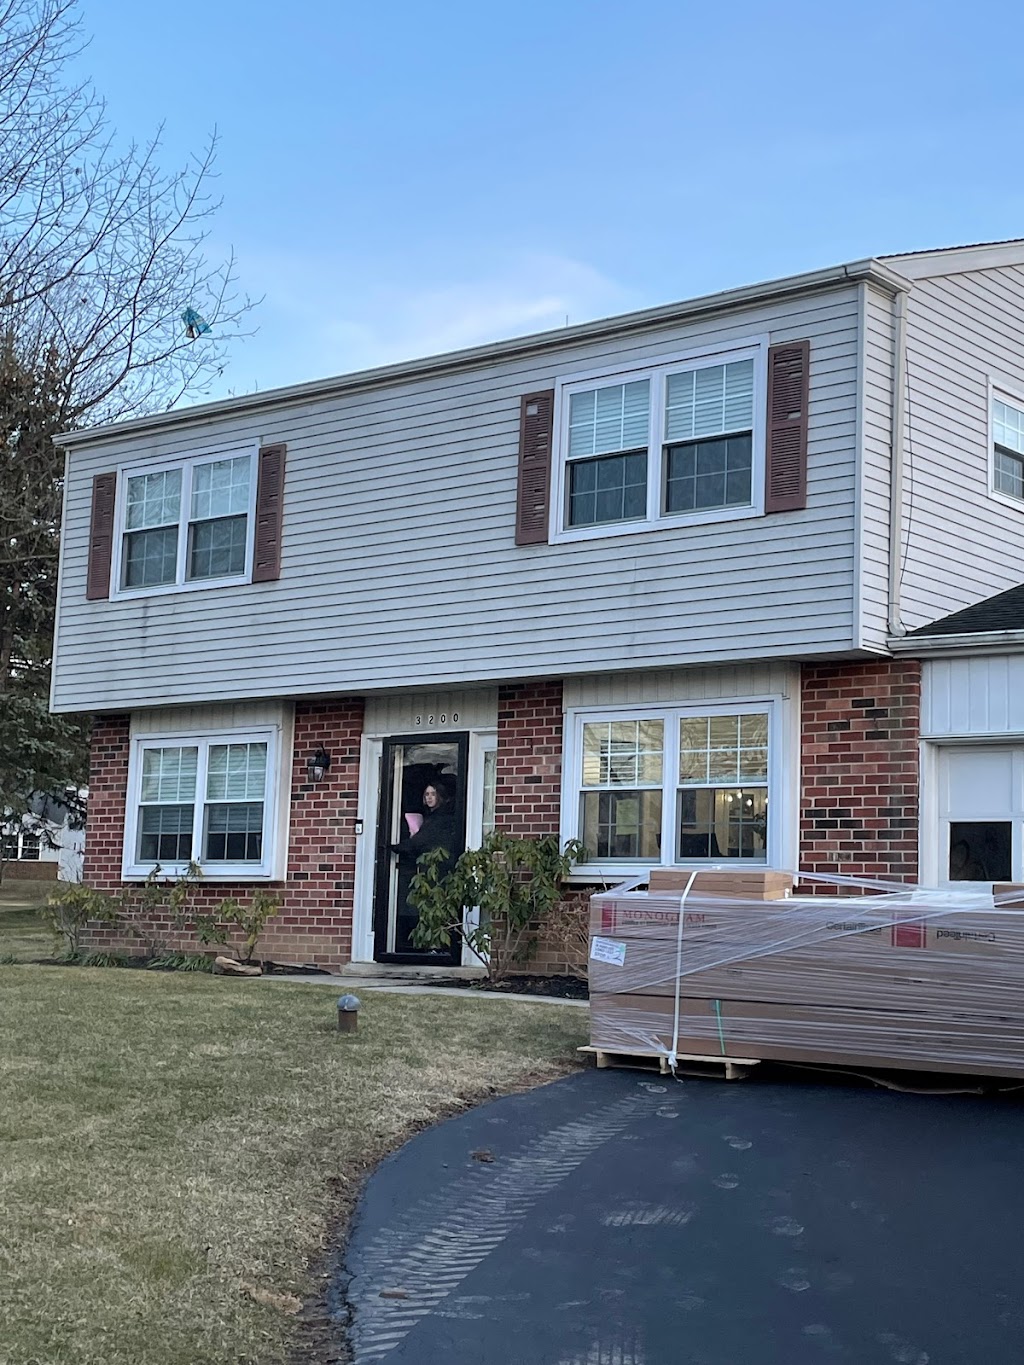 Impriano Roofing & Siding Inc. | 1662 Dekalb Pike, Blue Bell, PA 19422 | Phone: (215) 654-1990